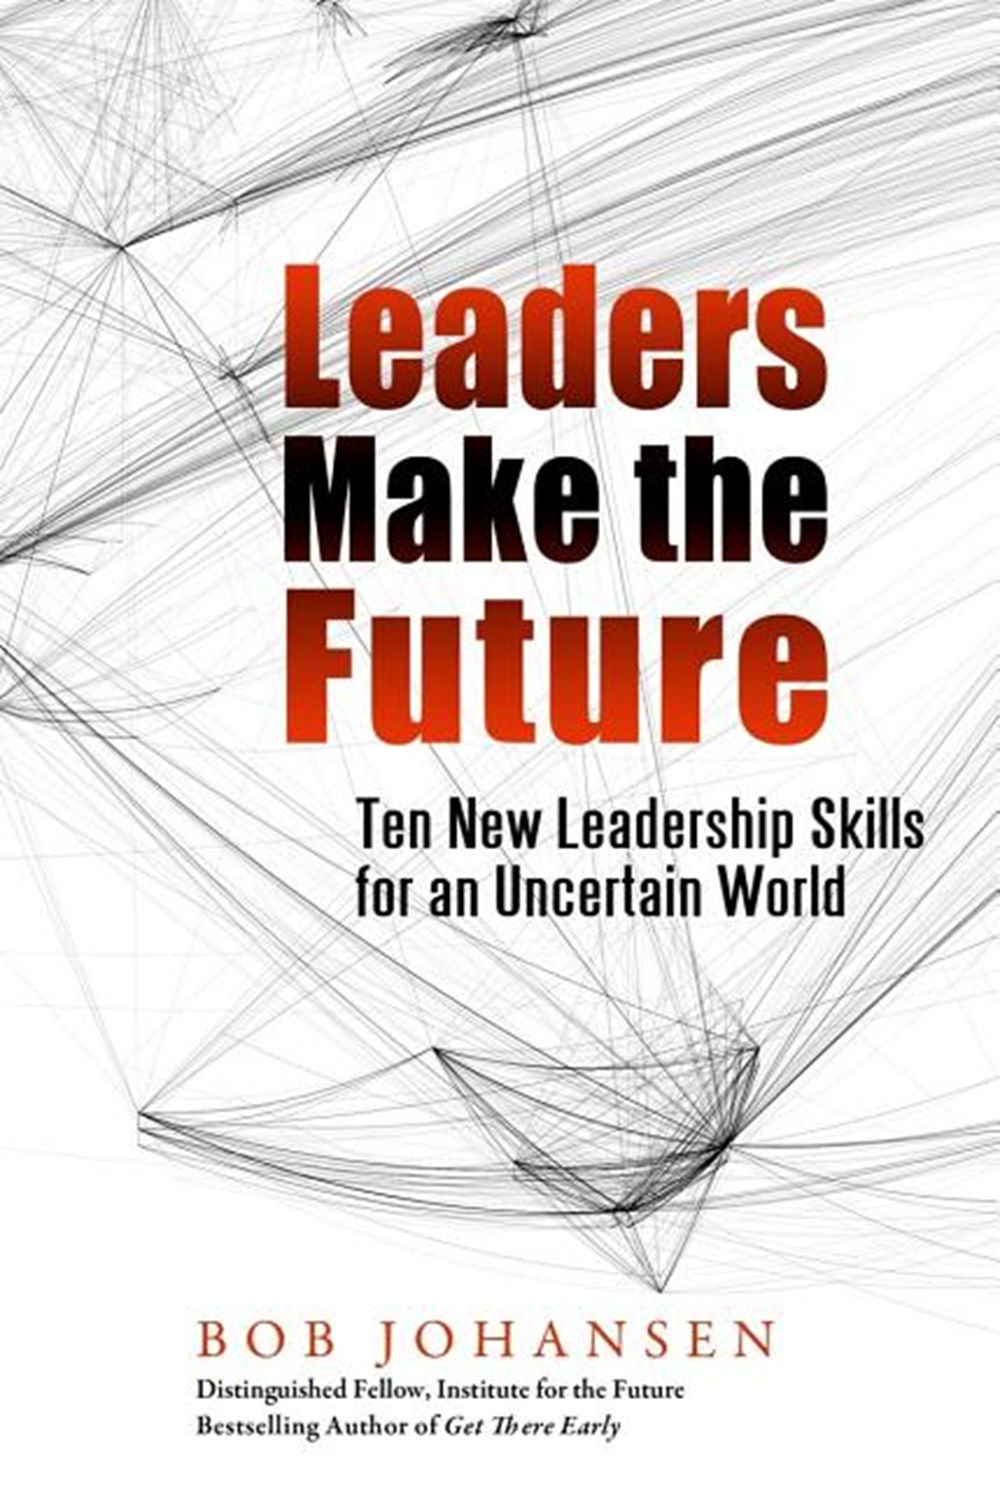 Leaders Make the Future: Ten New Leadership Skills for an Uncertain World (Second edition, Revised a